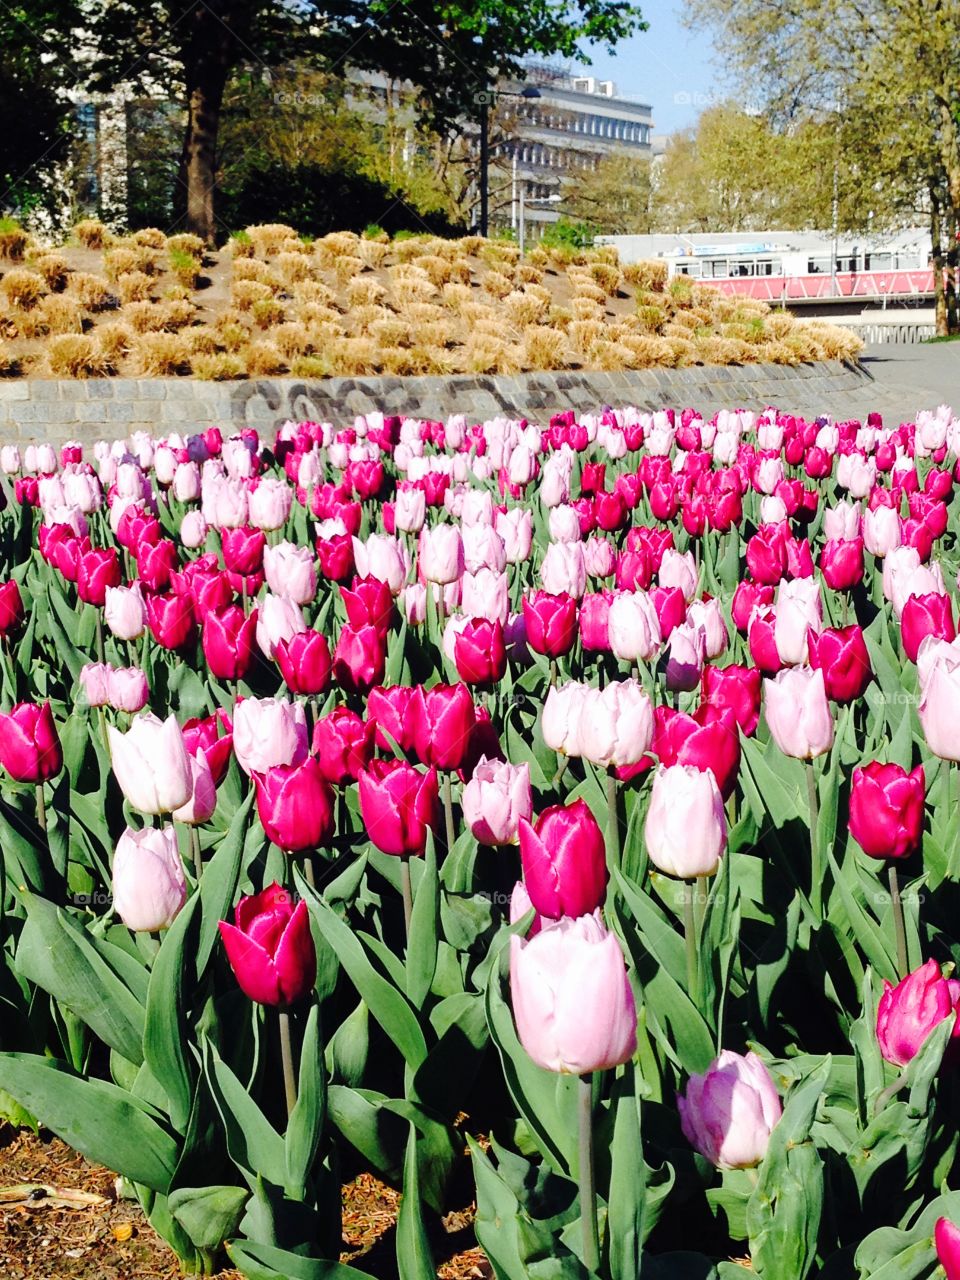 View of blooming tulips